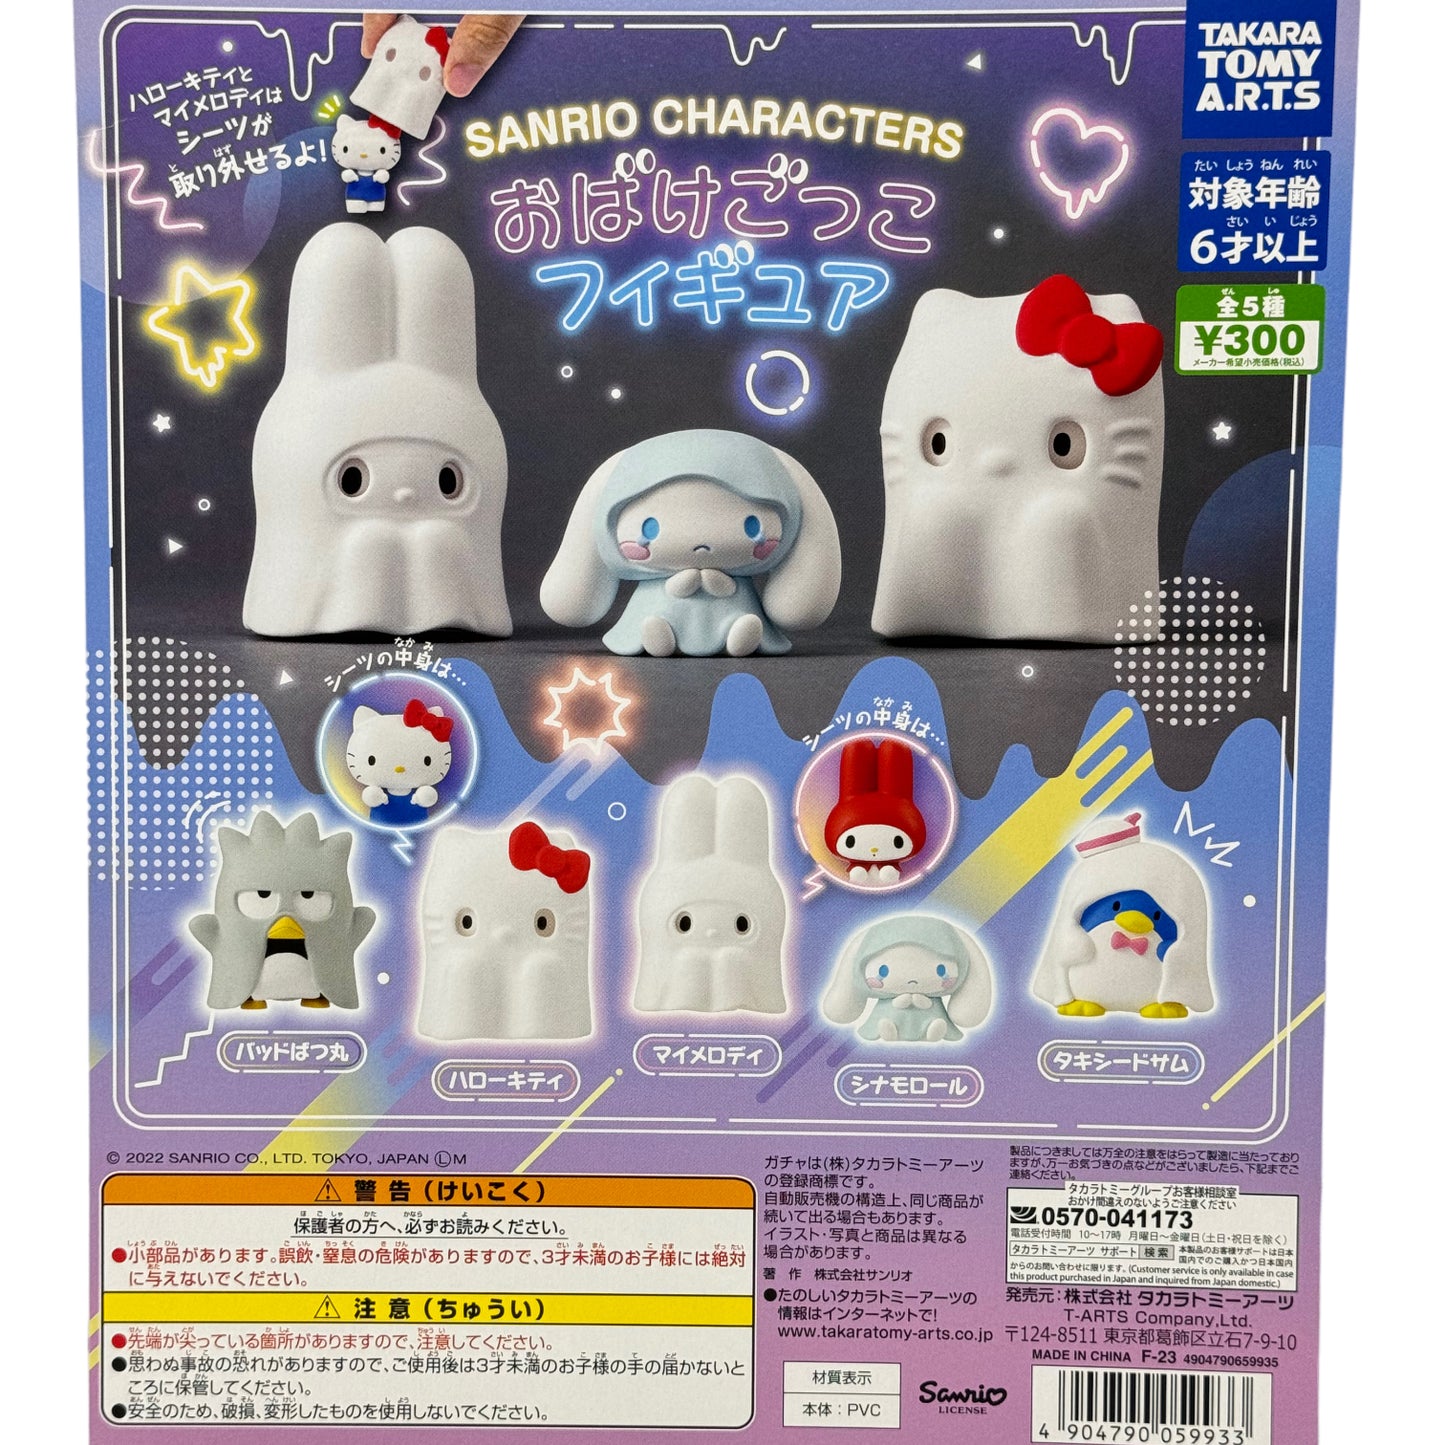 HELLO KITTY + Ghost Costume Gashapon (NEW) Sanrio Let's Act Like Ghosts Figure